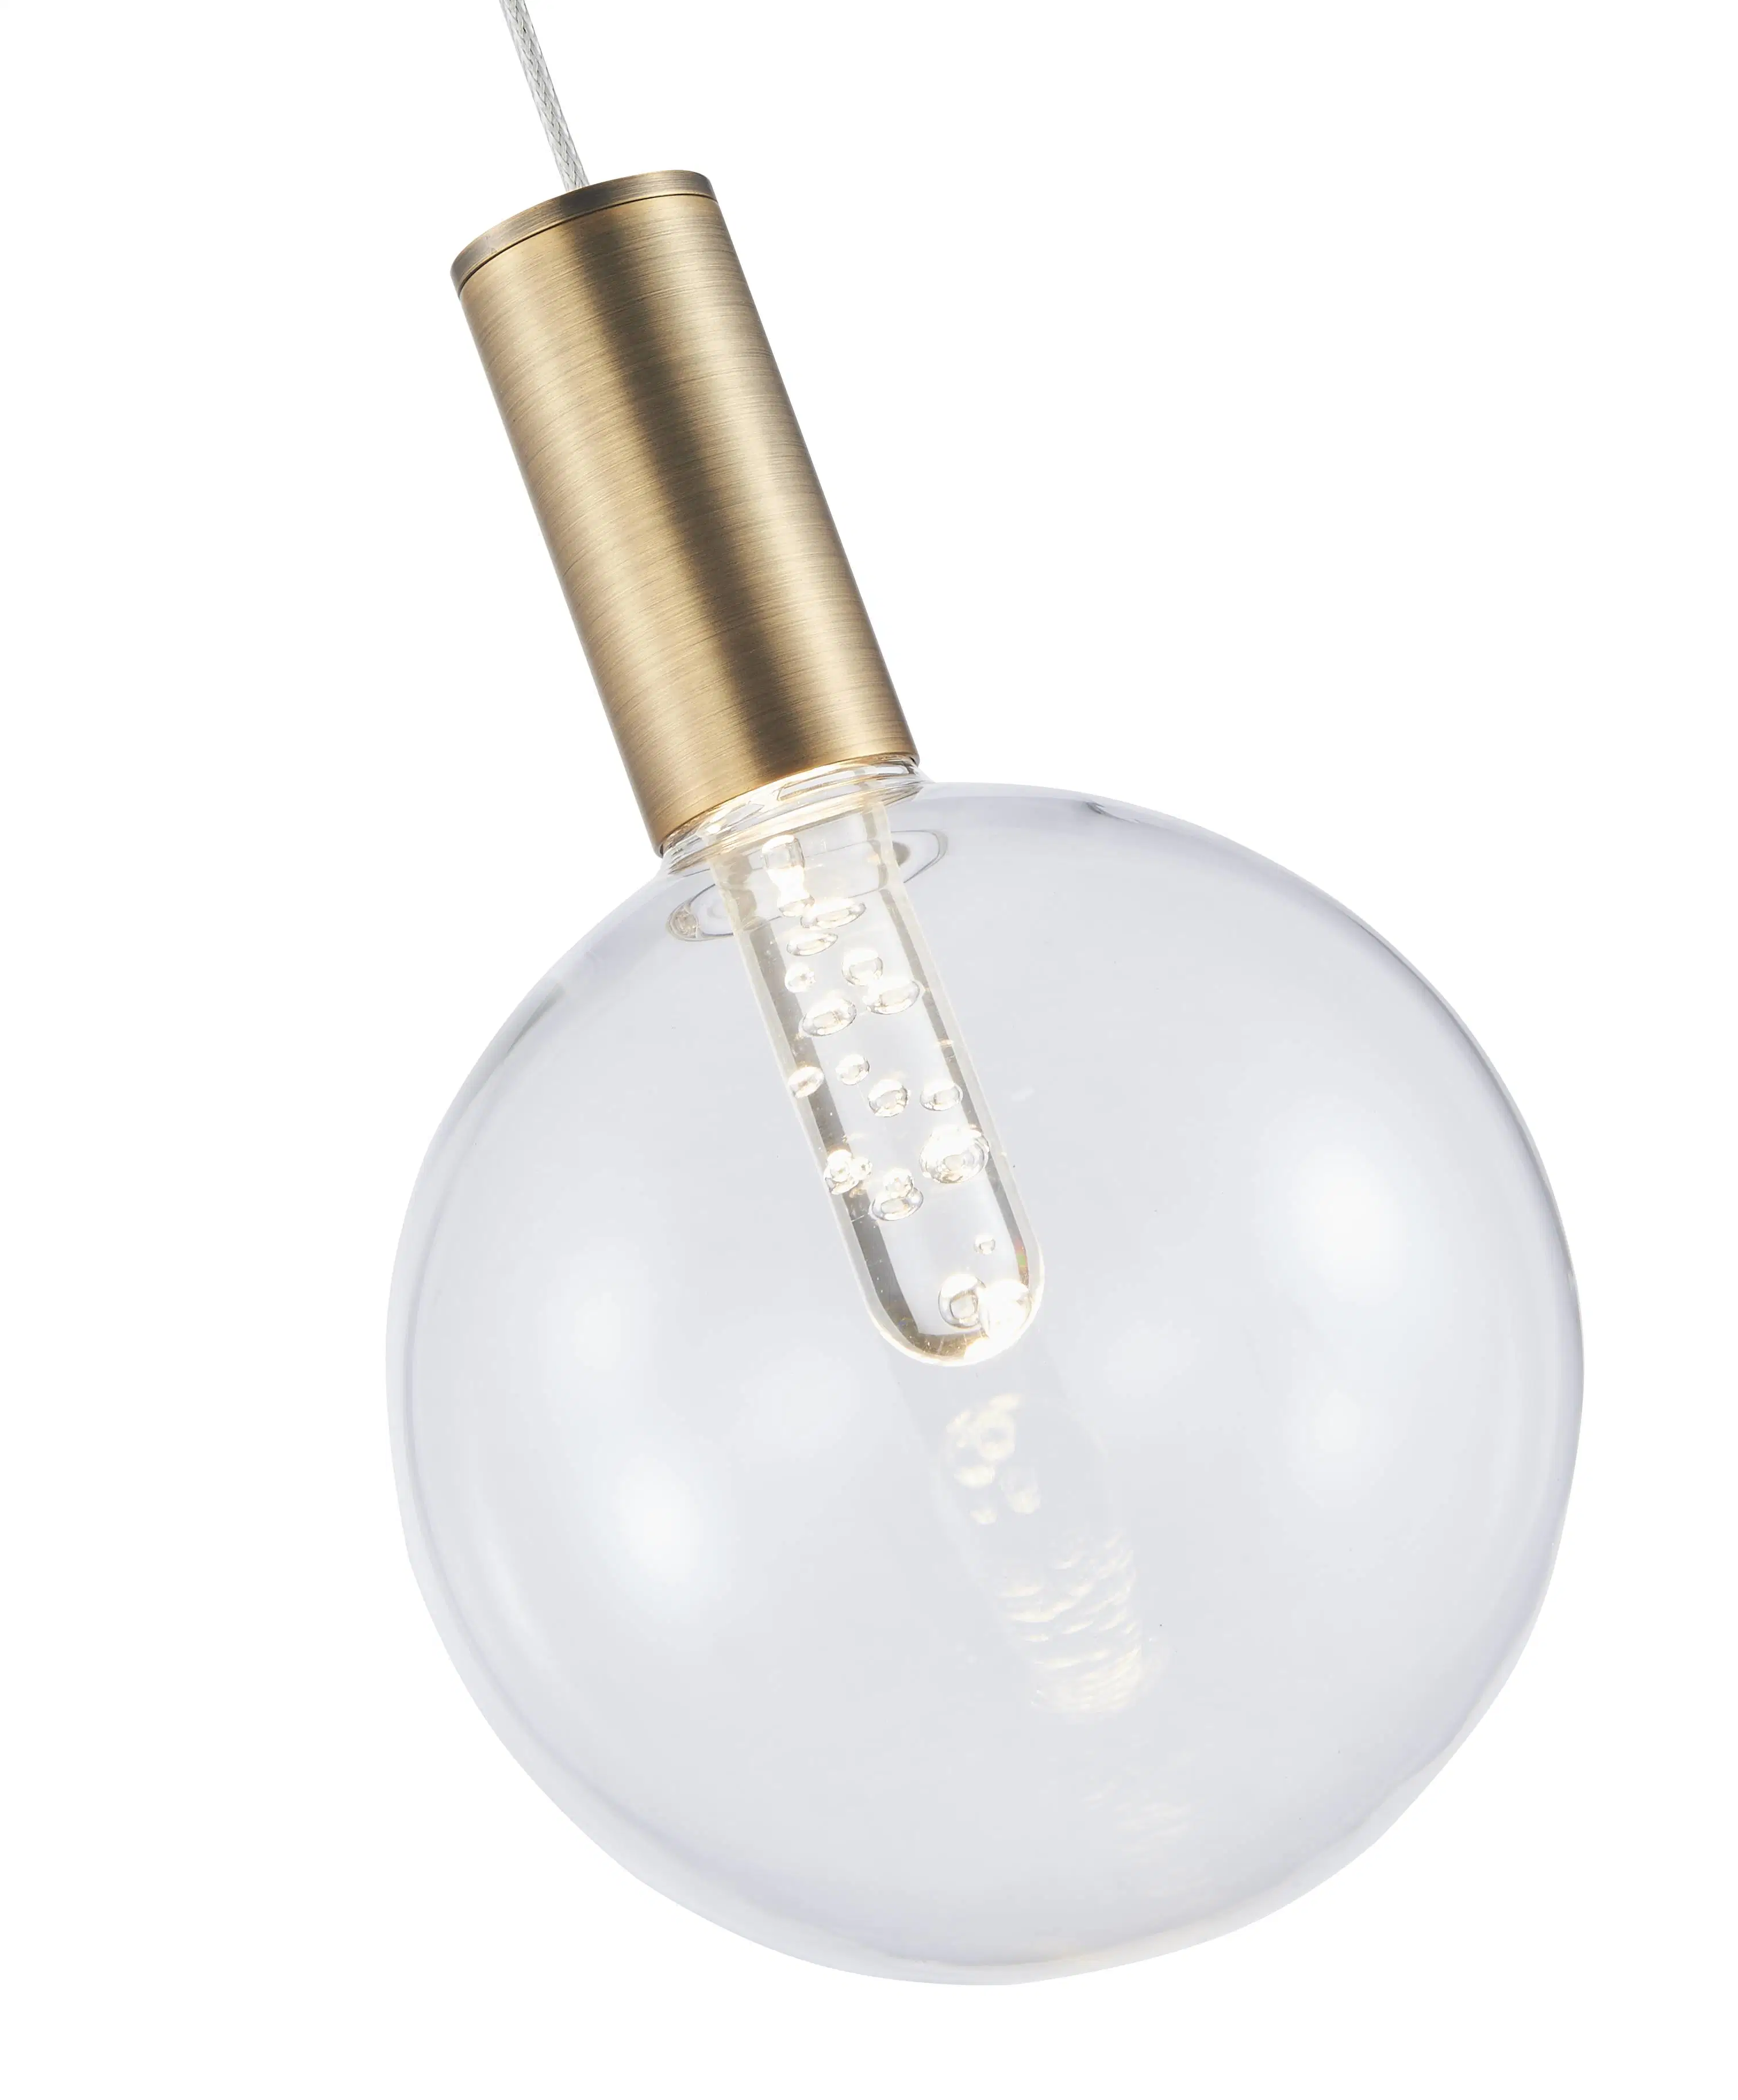 Clear Globe Aged Messing LED Pendelleuchte mit Clear Bubble Acryl (P1006)